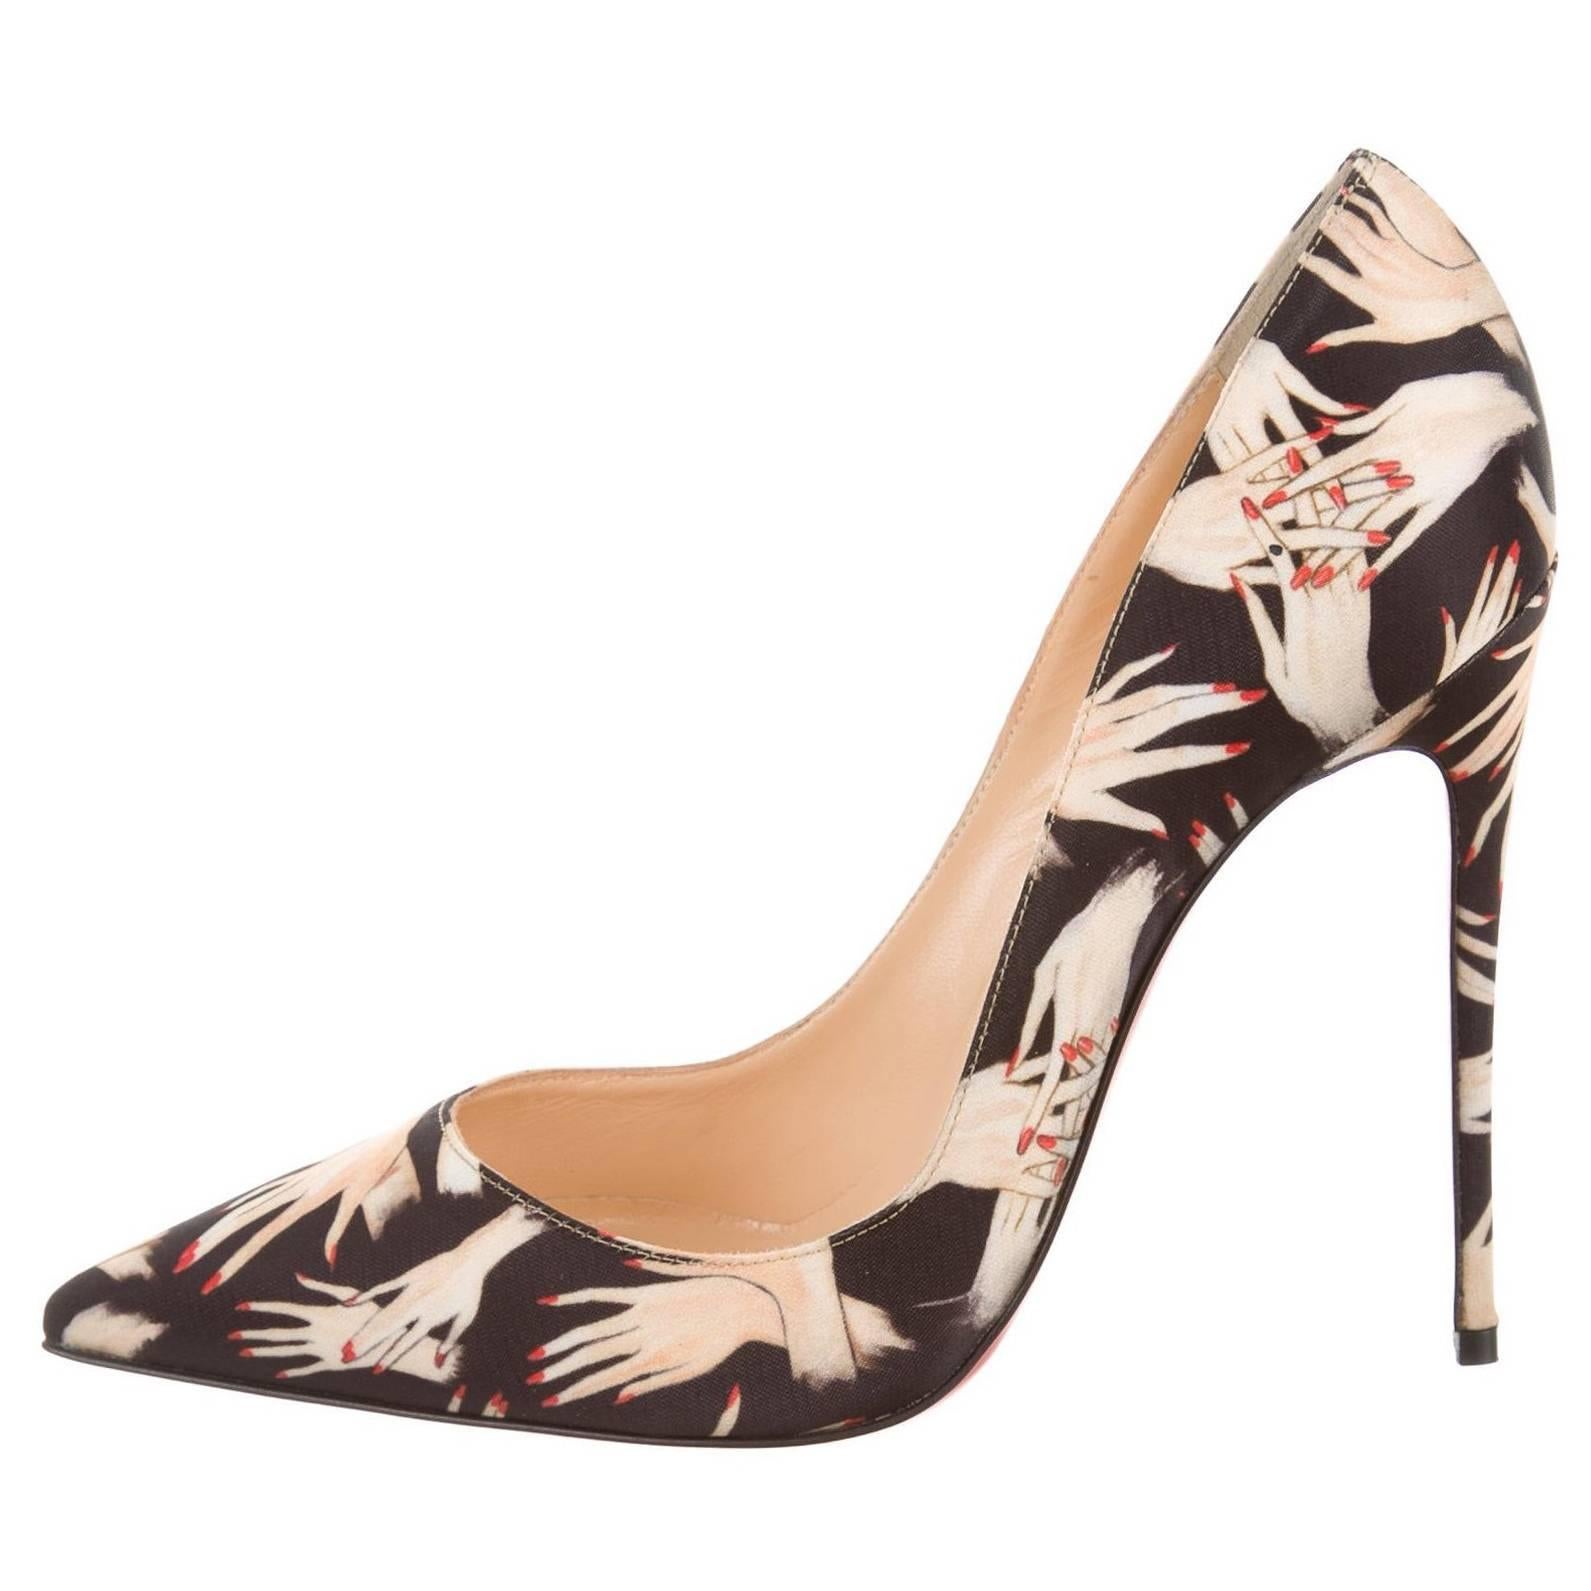 Christian Louboutin New Sold Out Limited Edition So Kate Heels Pumps